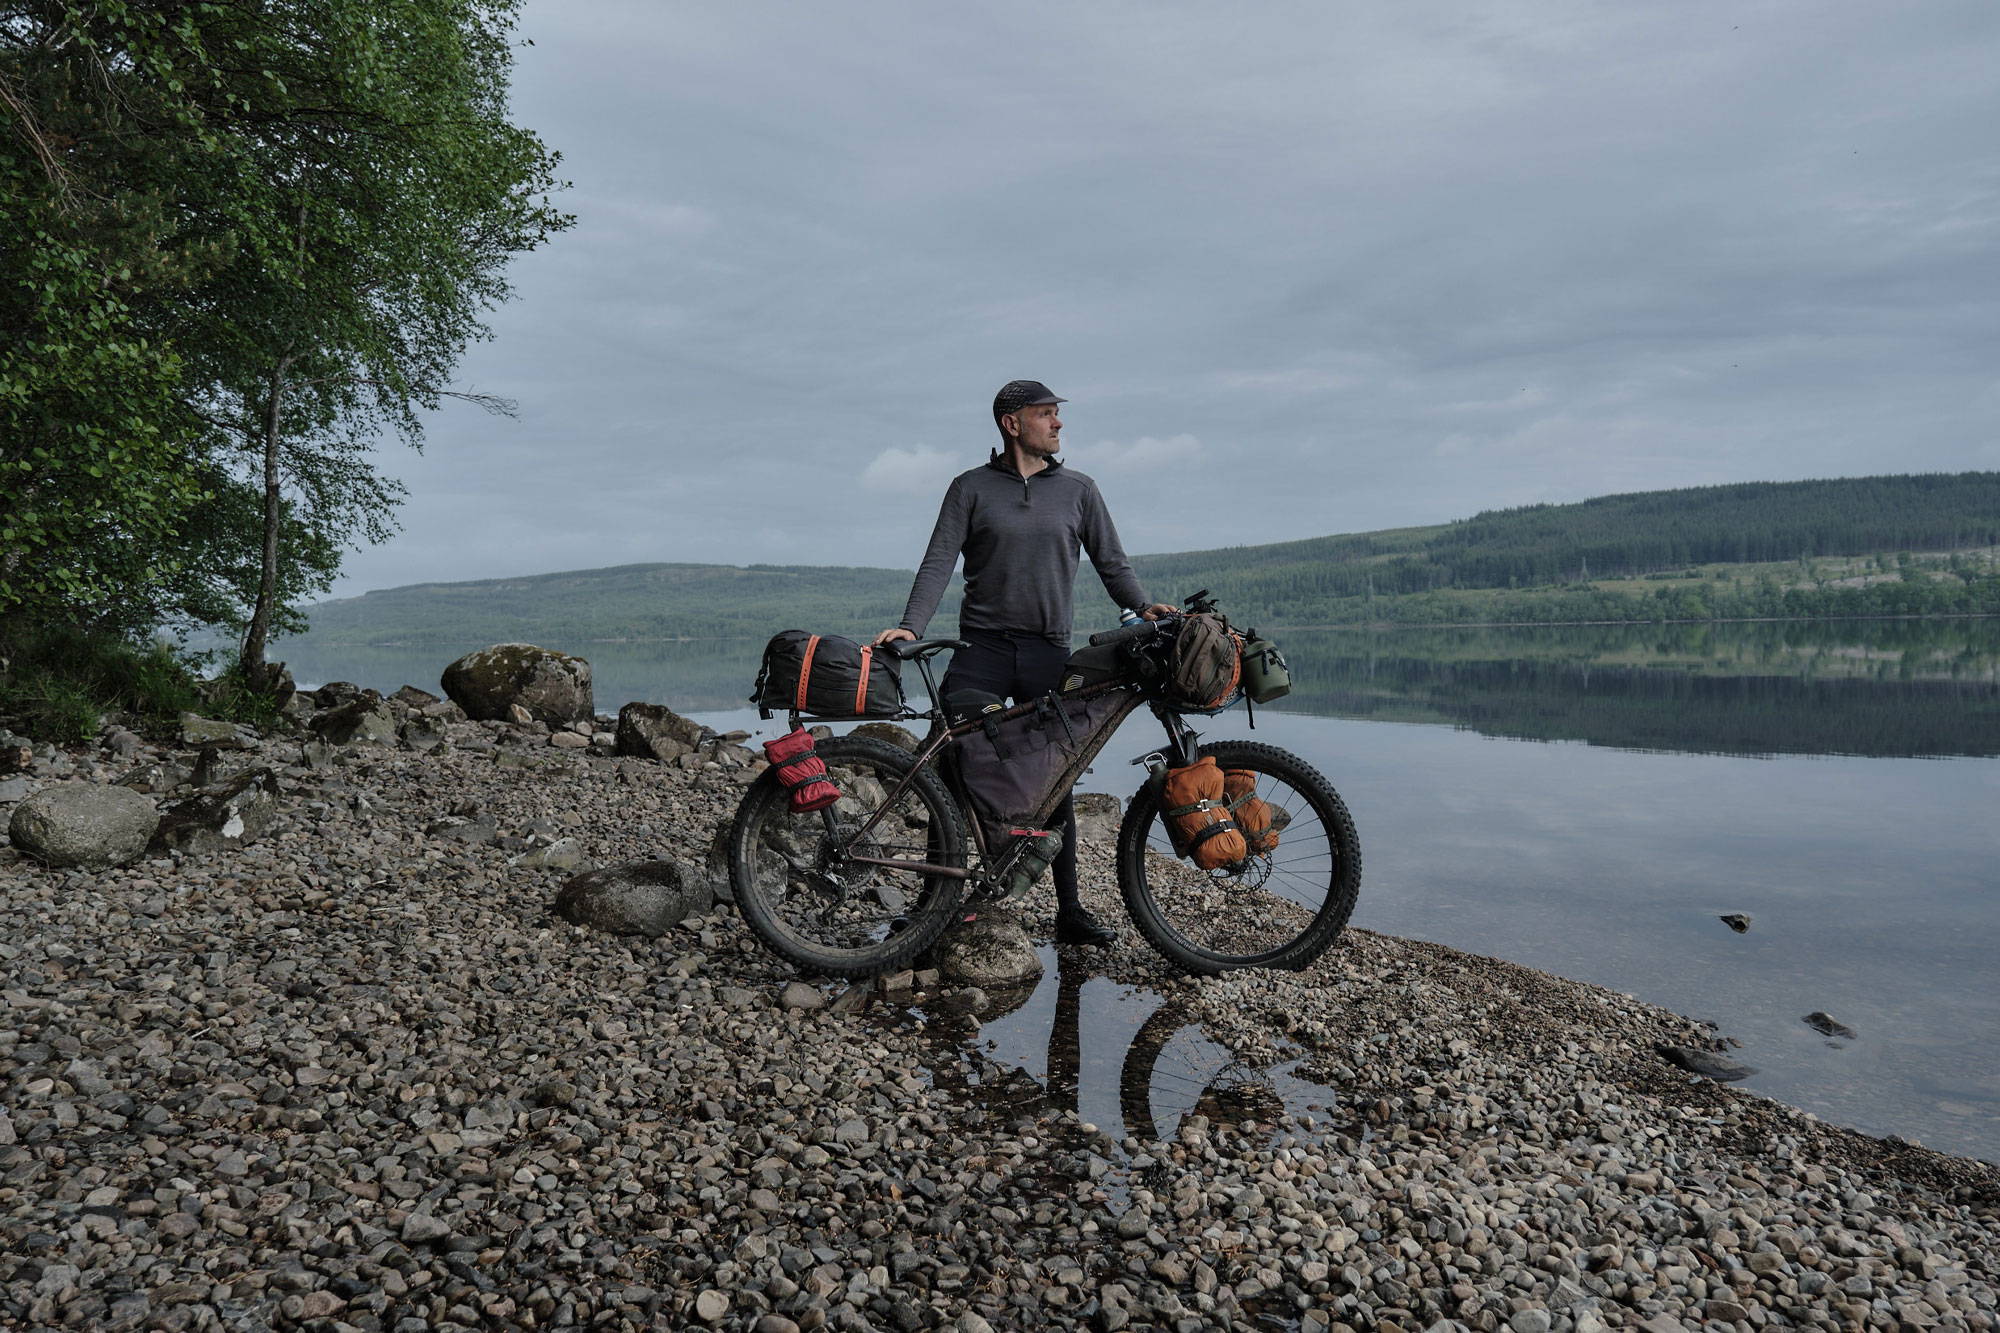 Andy Cox posing with his bike near a lake